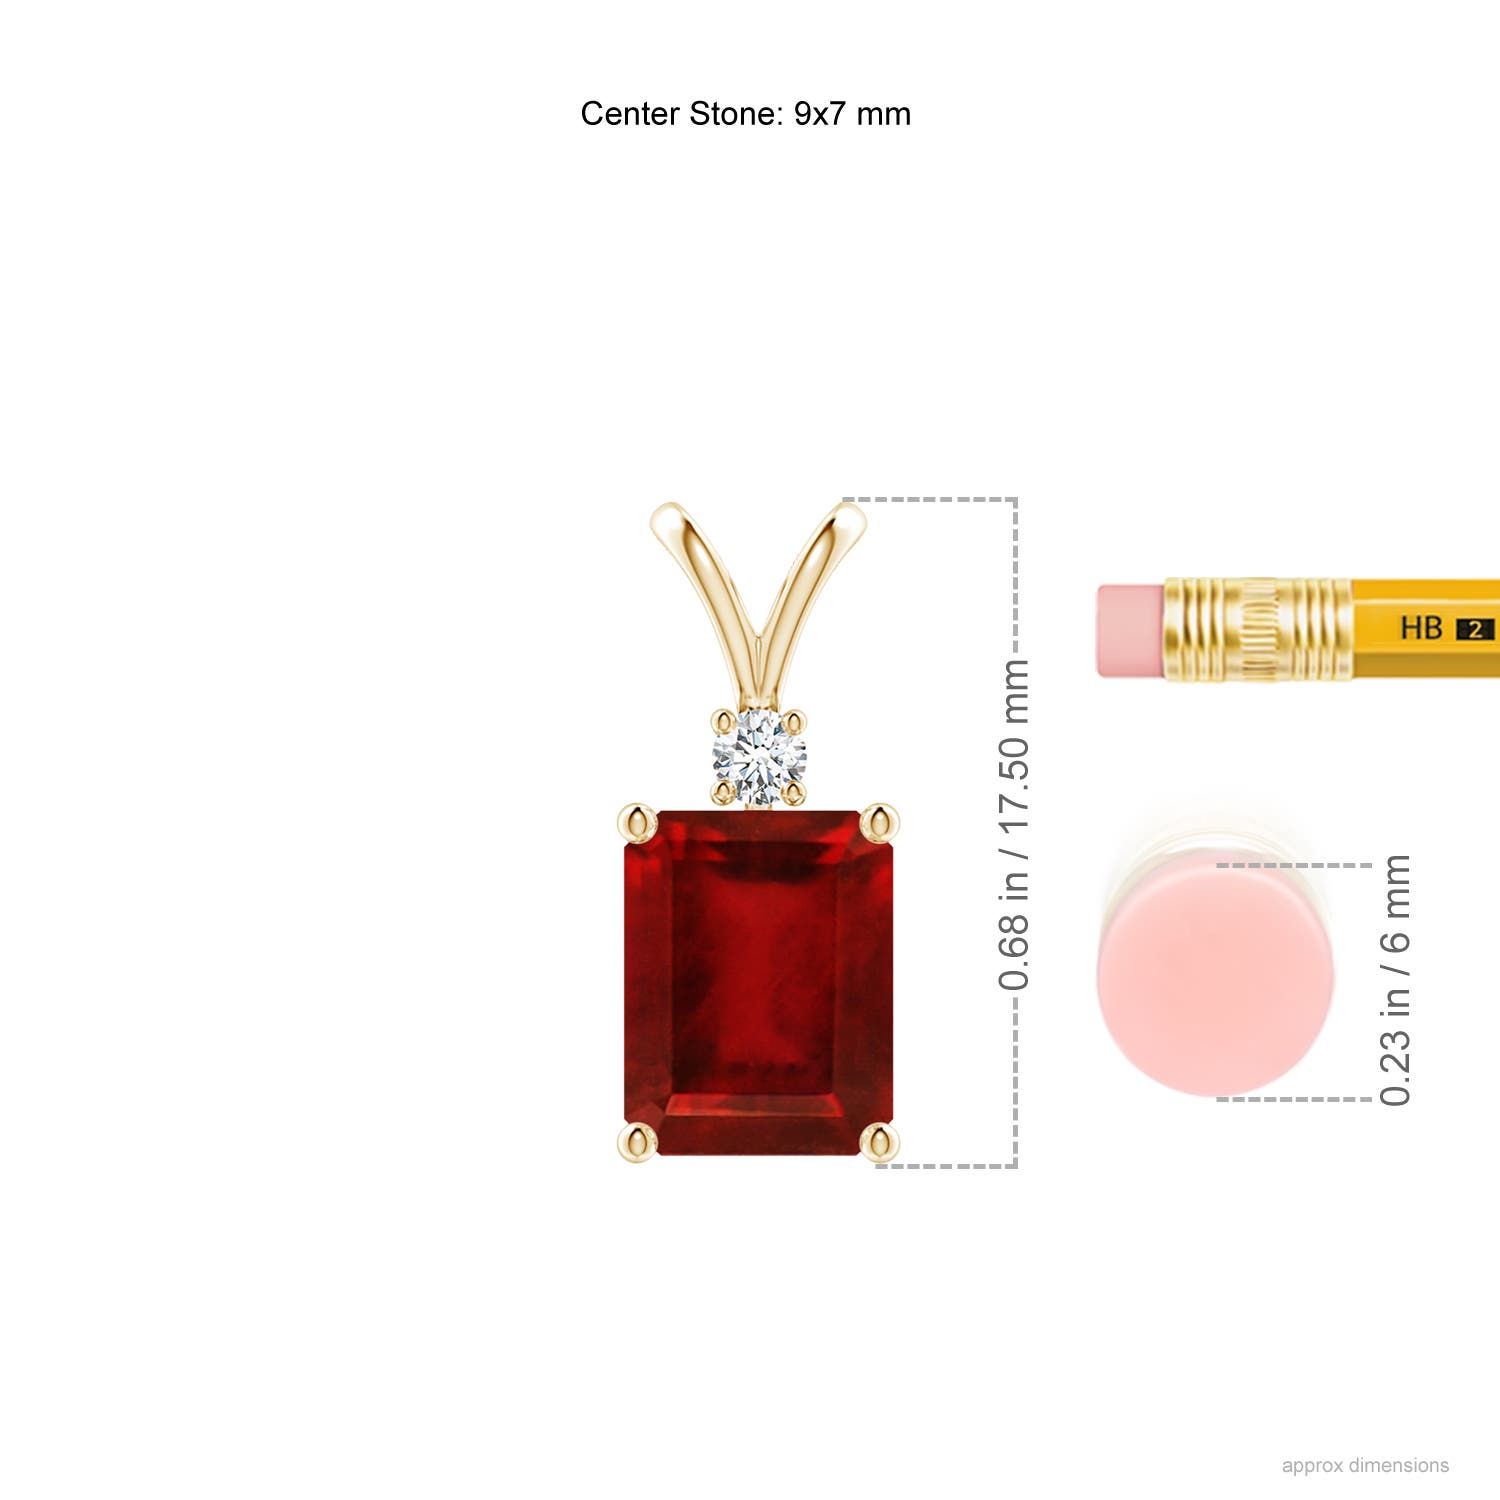 AAAA - Ruby / 3.07 CT / 14 KT Yellow Gold